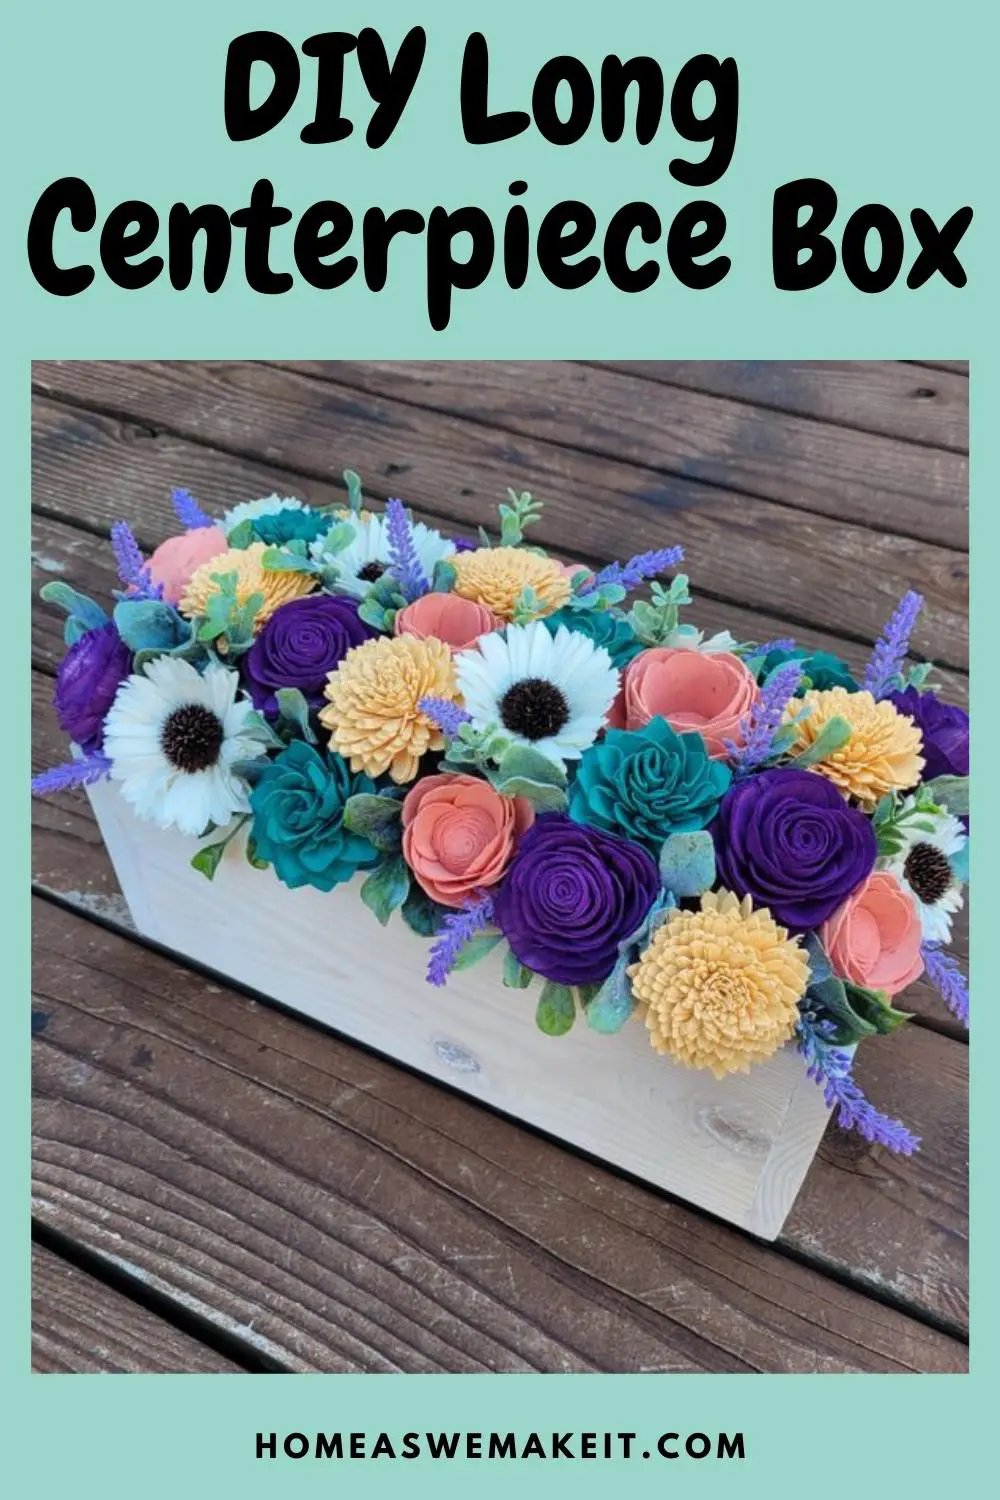 How to Make an Easy, DIY Wood Centerpiece Box